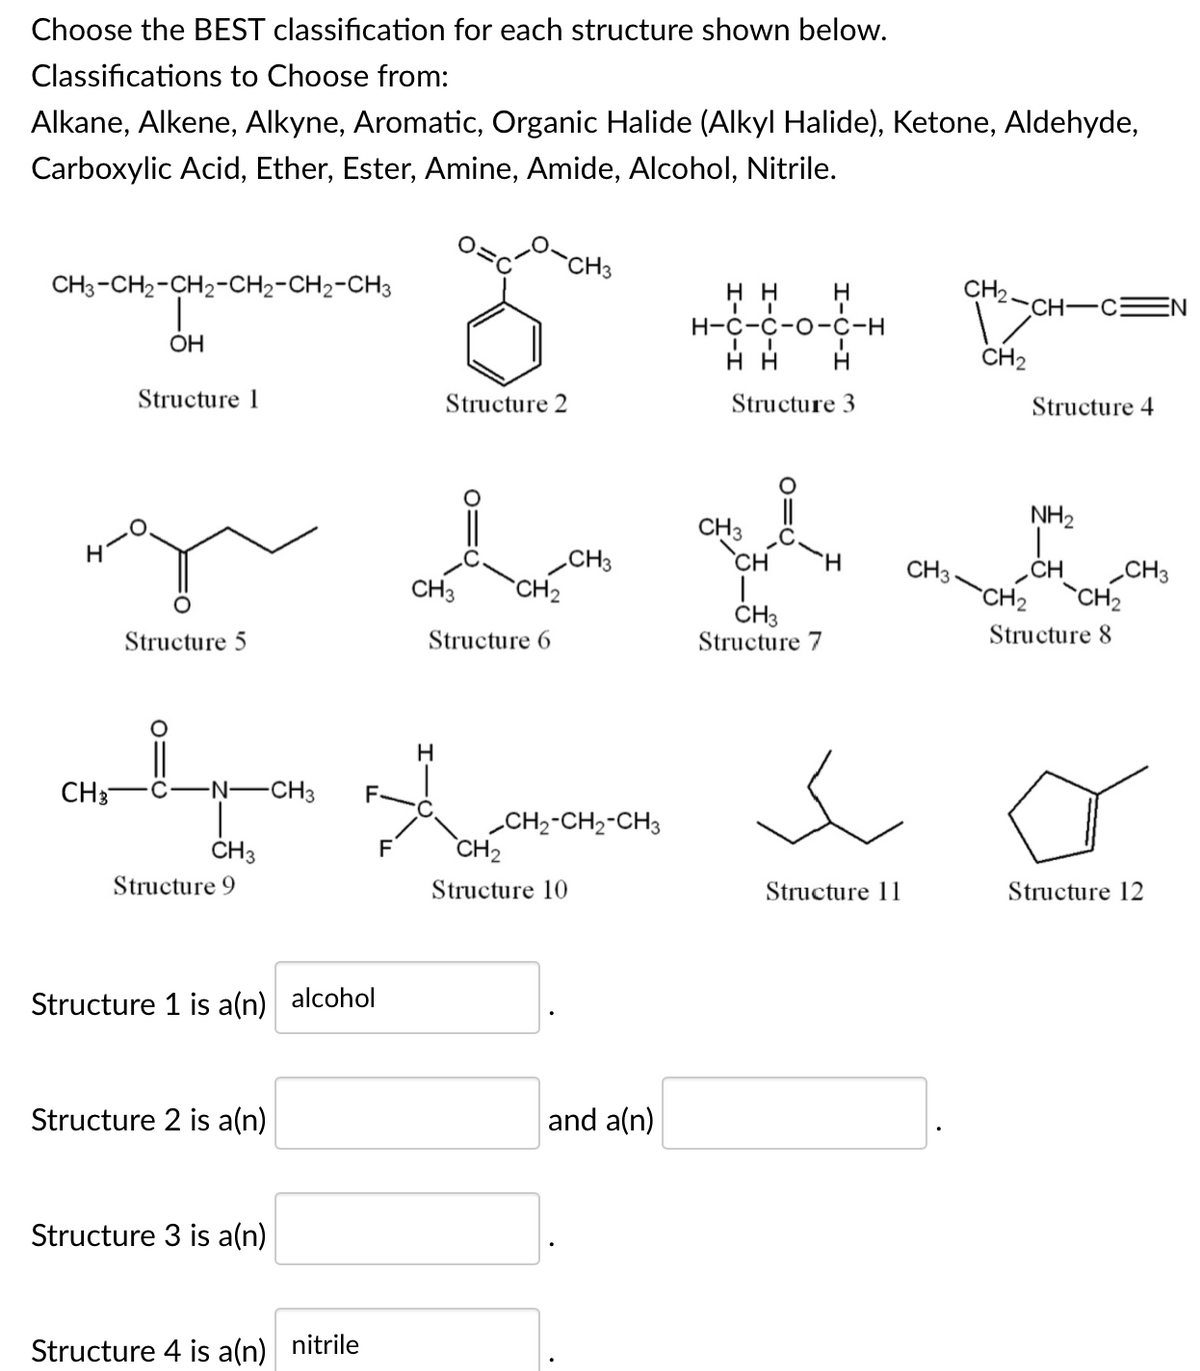 Choose the BEST classification for each structure shown below.
Classifications to Choose from:
Alkane, Alkene, Alkyne, Aromatic, Organic Halide (Alkyl Halide), Ketone, Aldehyde,
Carboxylic Acid, Ether, Ester, Amine, Amide, Alcohol, Nitrile.
`CH3
CH3-CH2-CH2-CH2-CH2-CH3
CH2-CH-C:
н
EN
Н-с-с-о-с-н
OH
нн
CH2
Structure 1
Structure 2
Structure 3
Structure 4
NH2
CH3
`CH
CH3
CH2
H.
CH3
„CH
CH3
CH3
`CH2
`CH2
ČH3
Structure 7
Structure 5
Structure 6
Structure 8
H
CH3
-Ņ-CH3
F-
CH2-CH2-CH3
CH2
ČH3
F
Structure 9
Structure 10
Structure 11
Structure 12
Structure 1 is aln) alcohol
Structure 2 is a(n)
and a(n)
Structure 3 is a(n)
Structure 4 is a(n) nitrile
